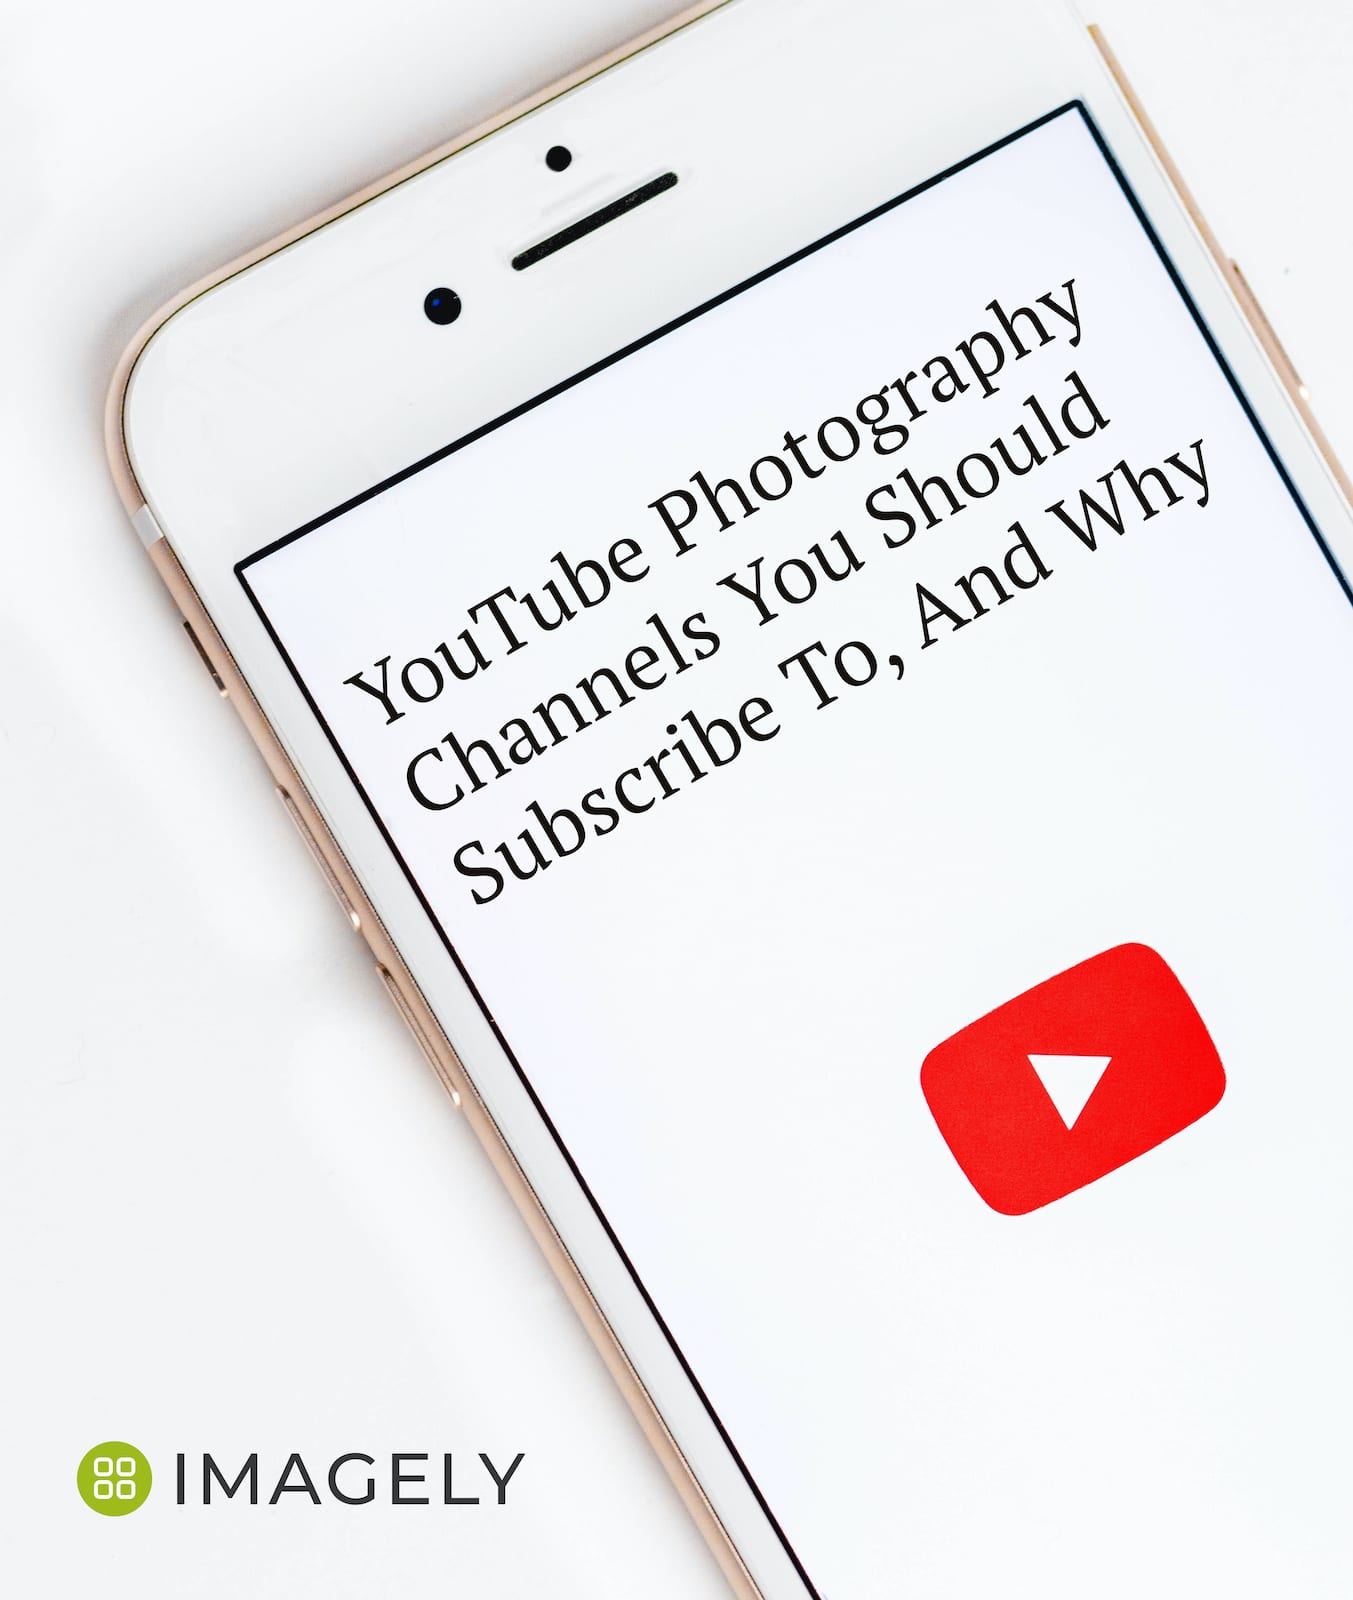 YouTube Photography Channels You Should Subscribe To, And Why